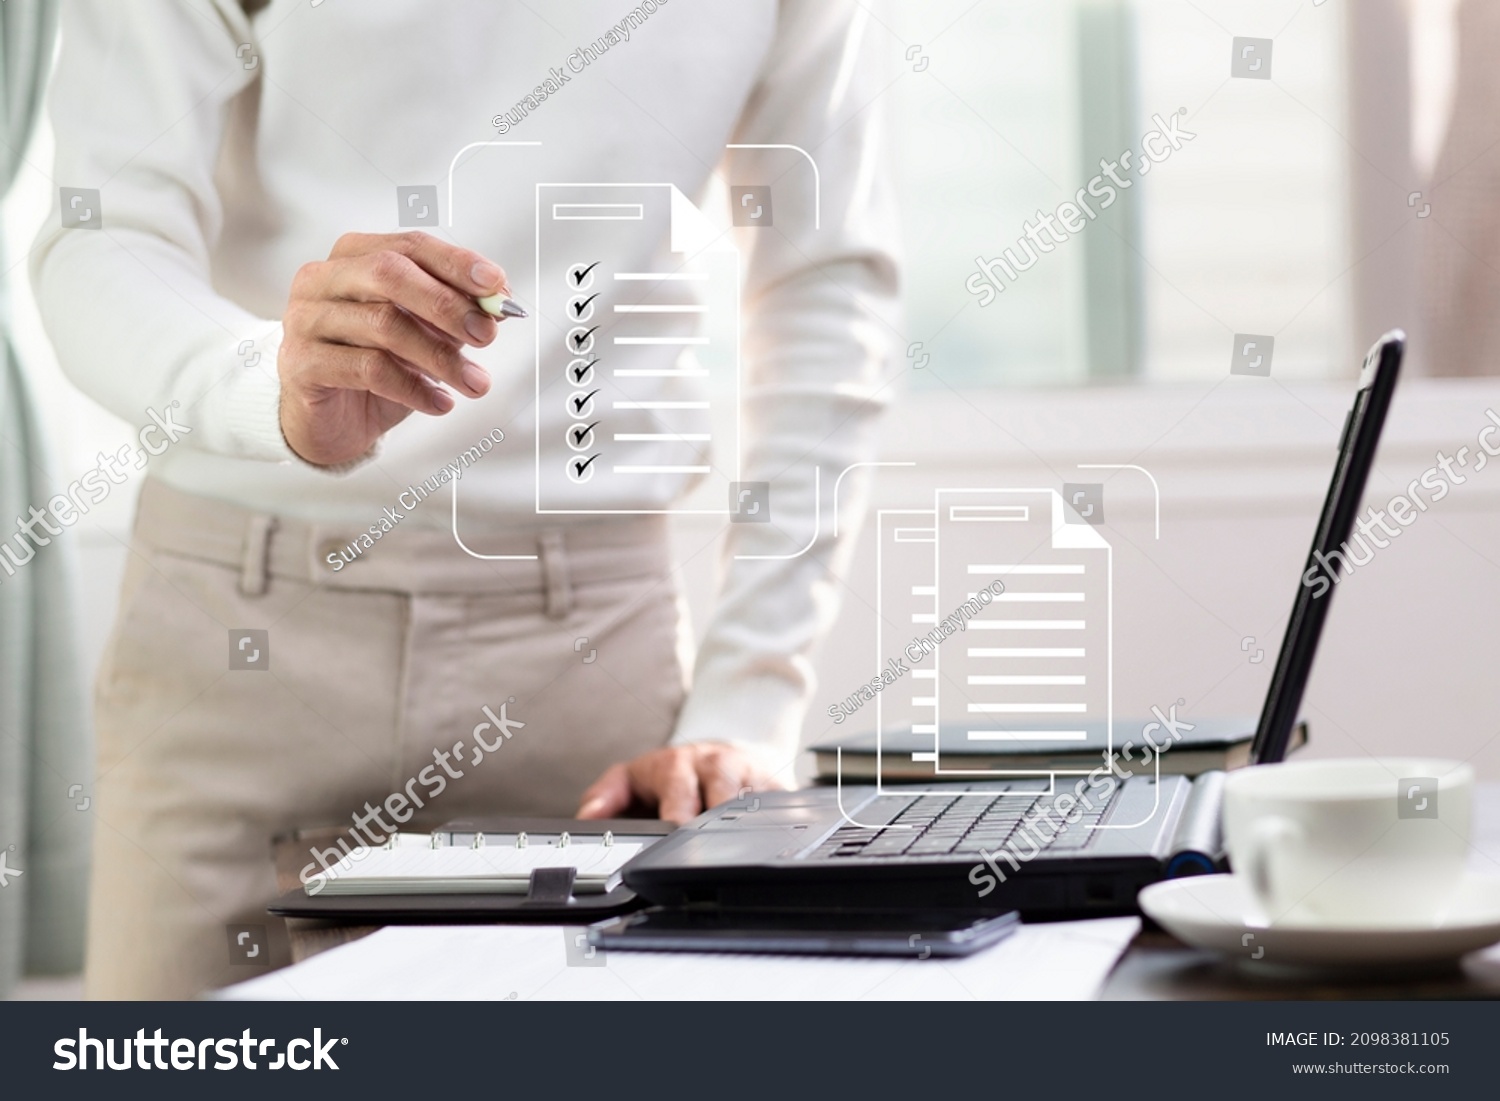 Hand of people check list on document icon to management data record system, Document management system concept #2098381105